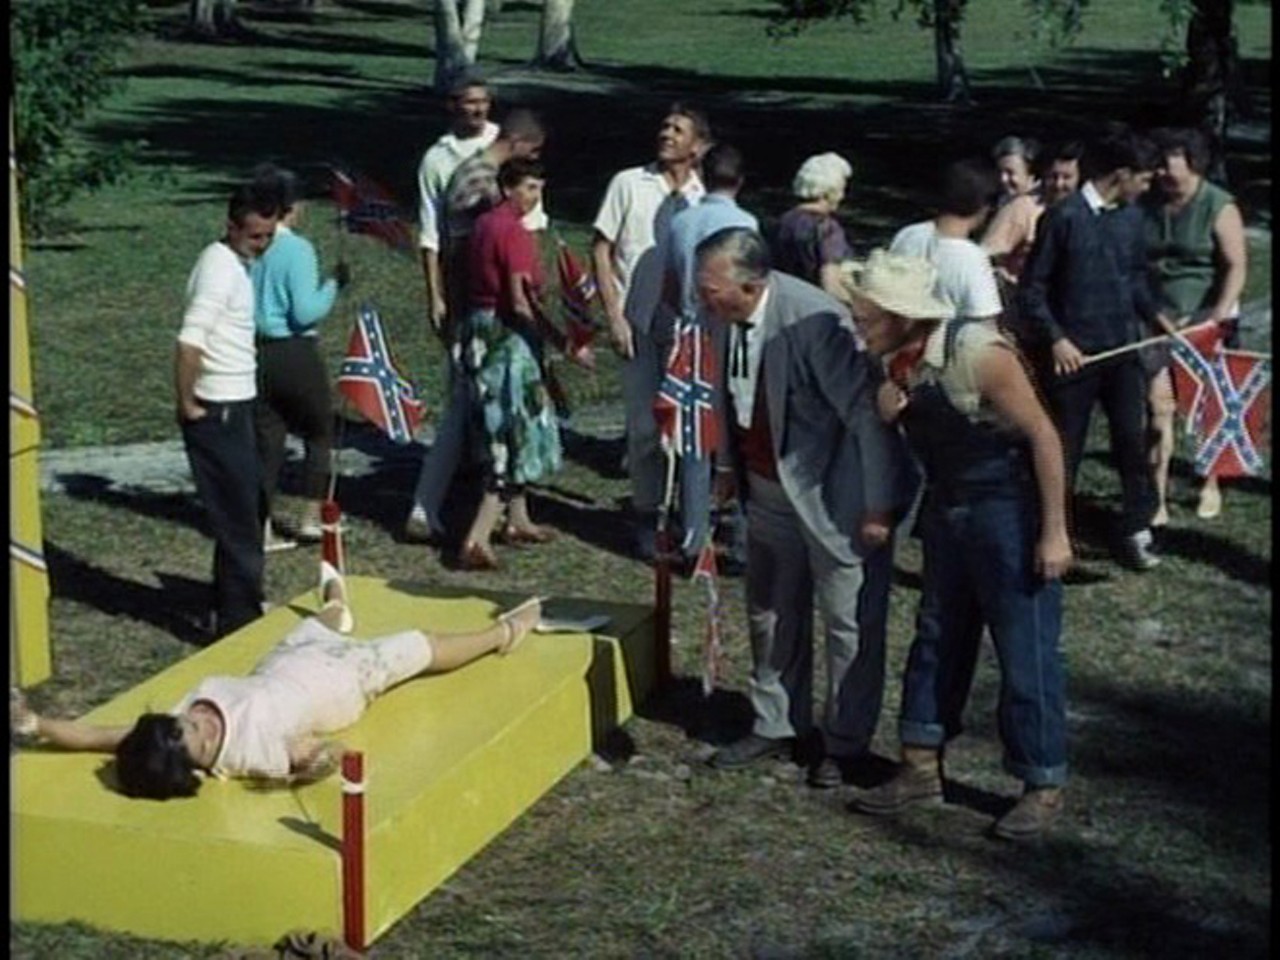 12. Two Thousand Maniacs! (1964)
Filmed in St. Cloud, Fla.
You don't ever want to go to Pleasant Valley. Northeastern tourists are lured to this twisted Southern town, and then axed to bits, roasted for dinner, dismembered by horses, you name it. Two Thousand Maniacs! was shot in 15 days and supposedly featured all the citizens of St. Cloud.